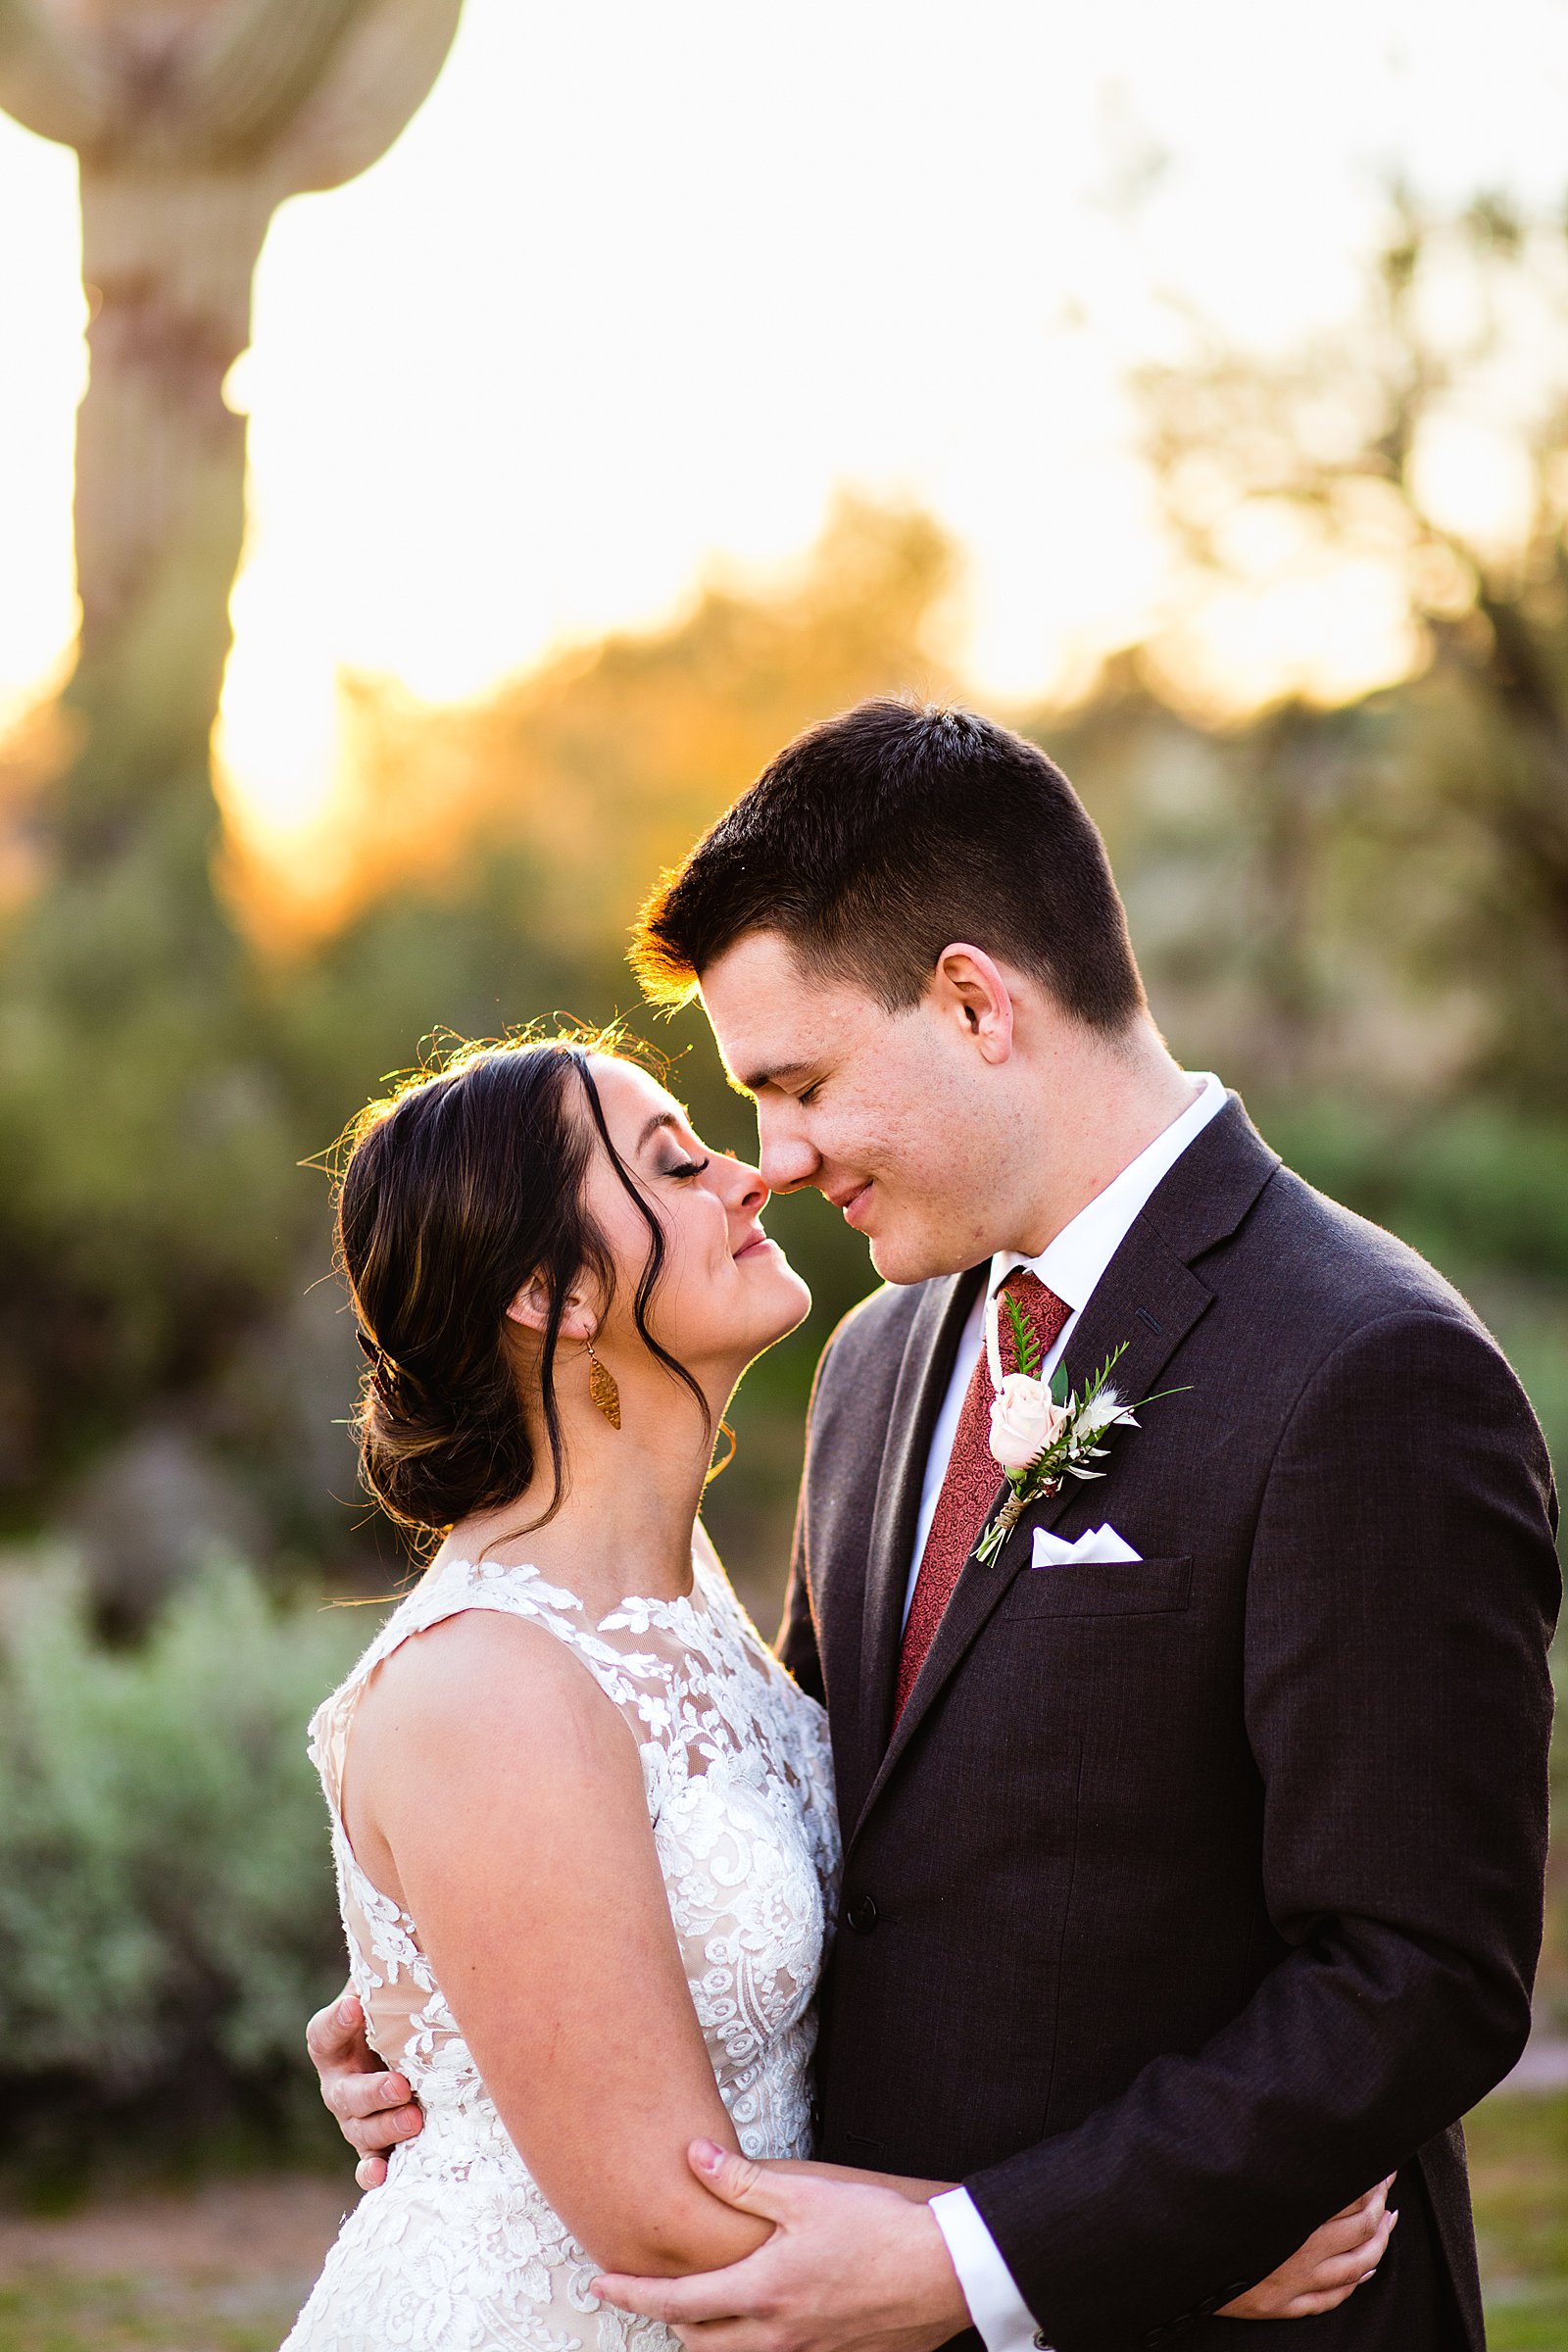 Bride and Groom share an intimate moment during their The Paseo wedding by Apache Junction wedding photographer PMA Photography.